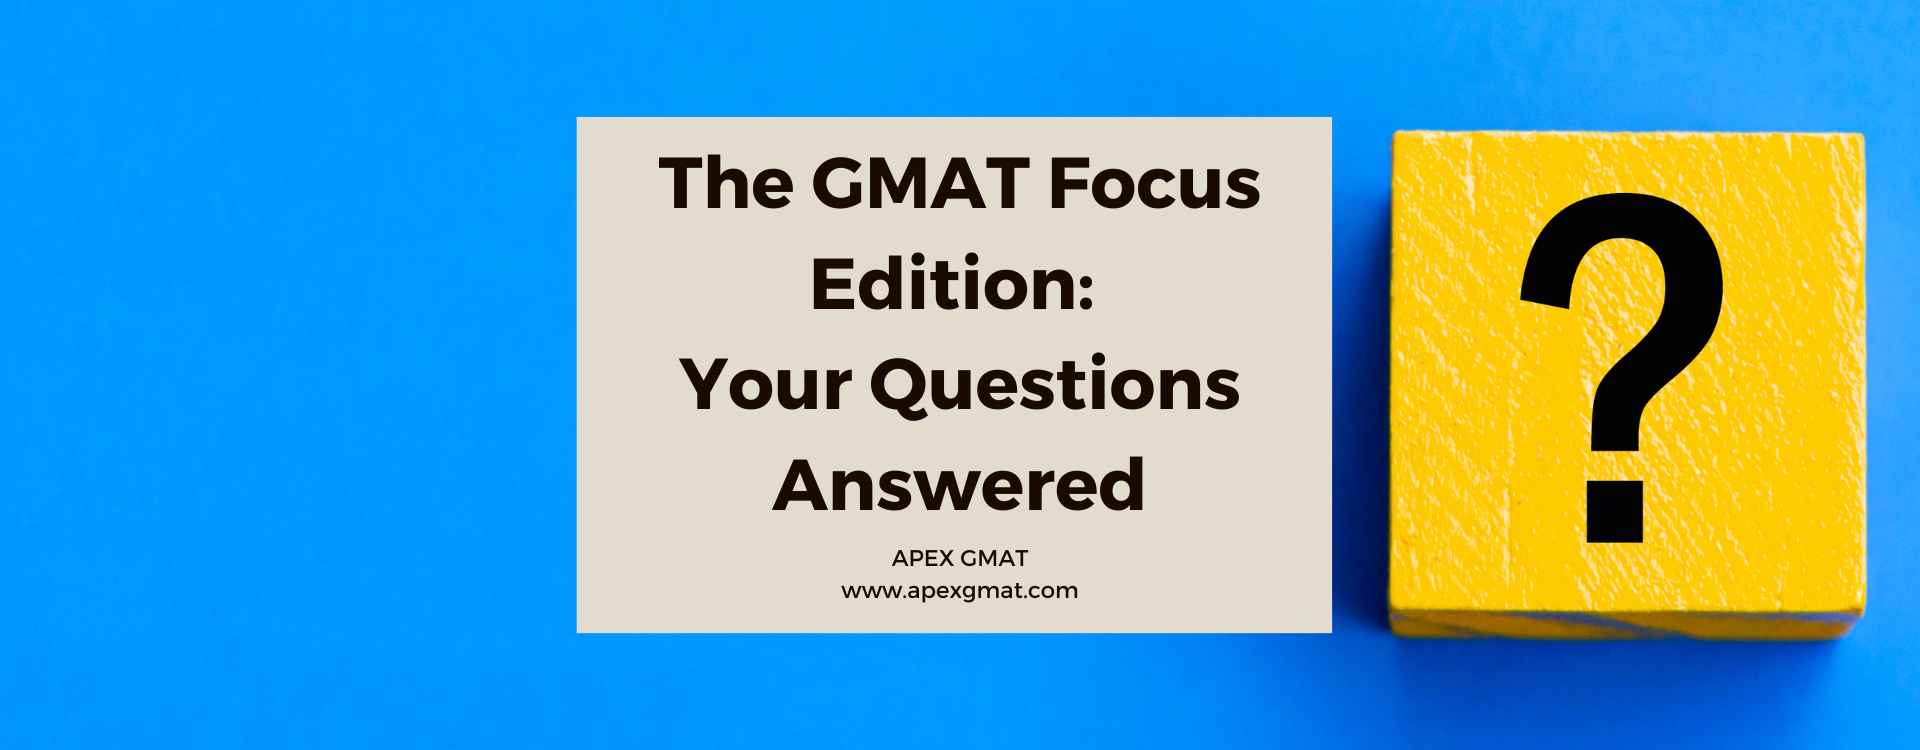 The GMAT Focus Edition Your Questions Answered ApexGMAT